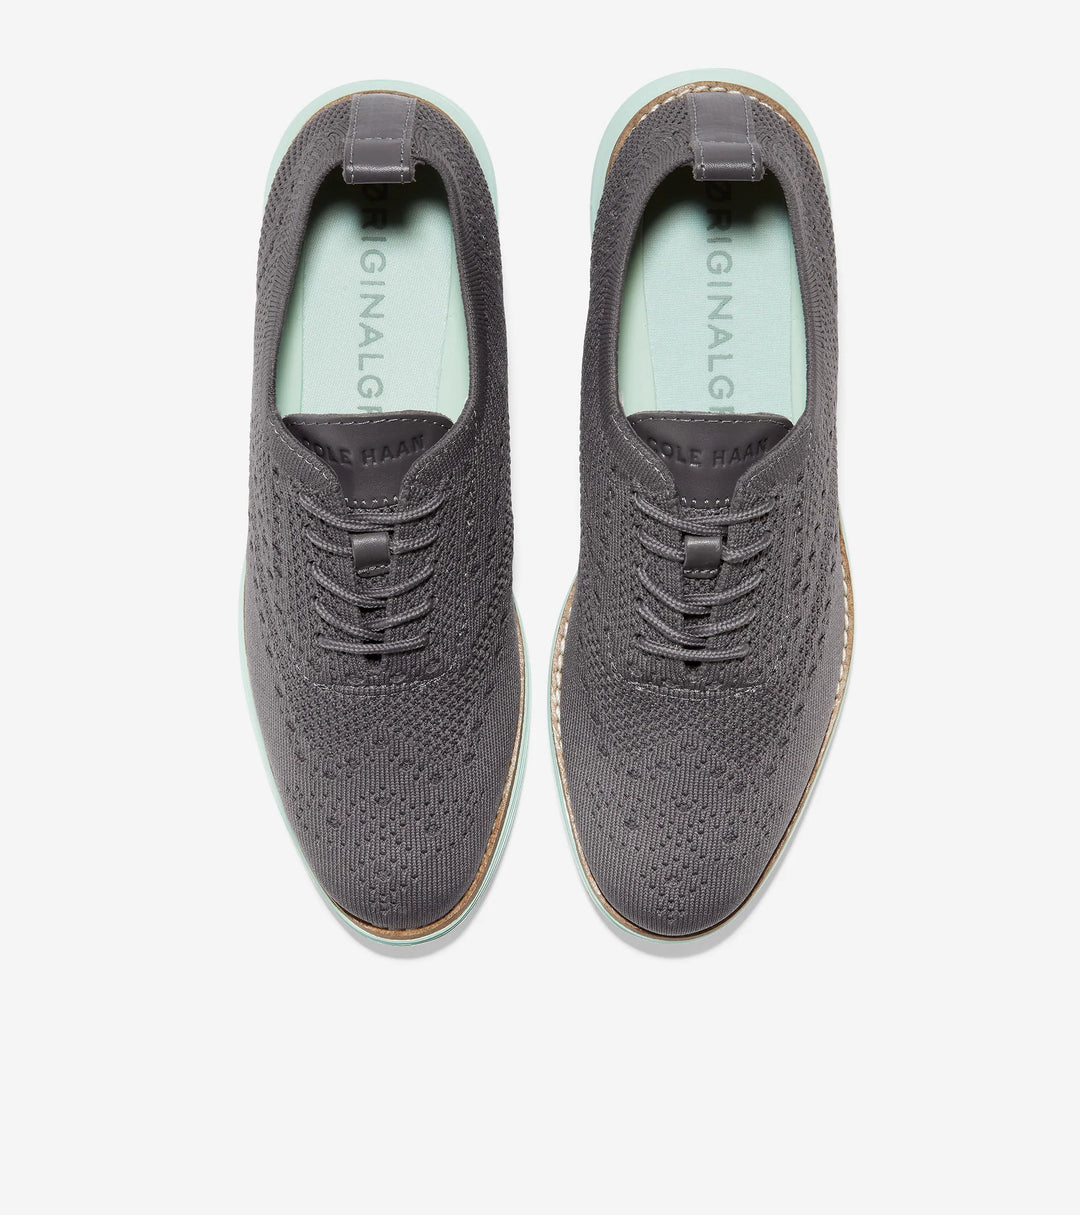 Women's Cole Haan OG Grand Stitchlite Wing Oxford Dark Pavement - Orleans Shoe Co.